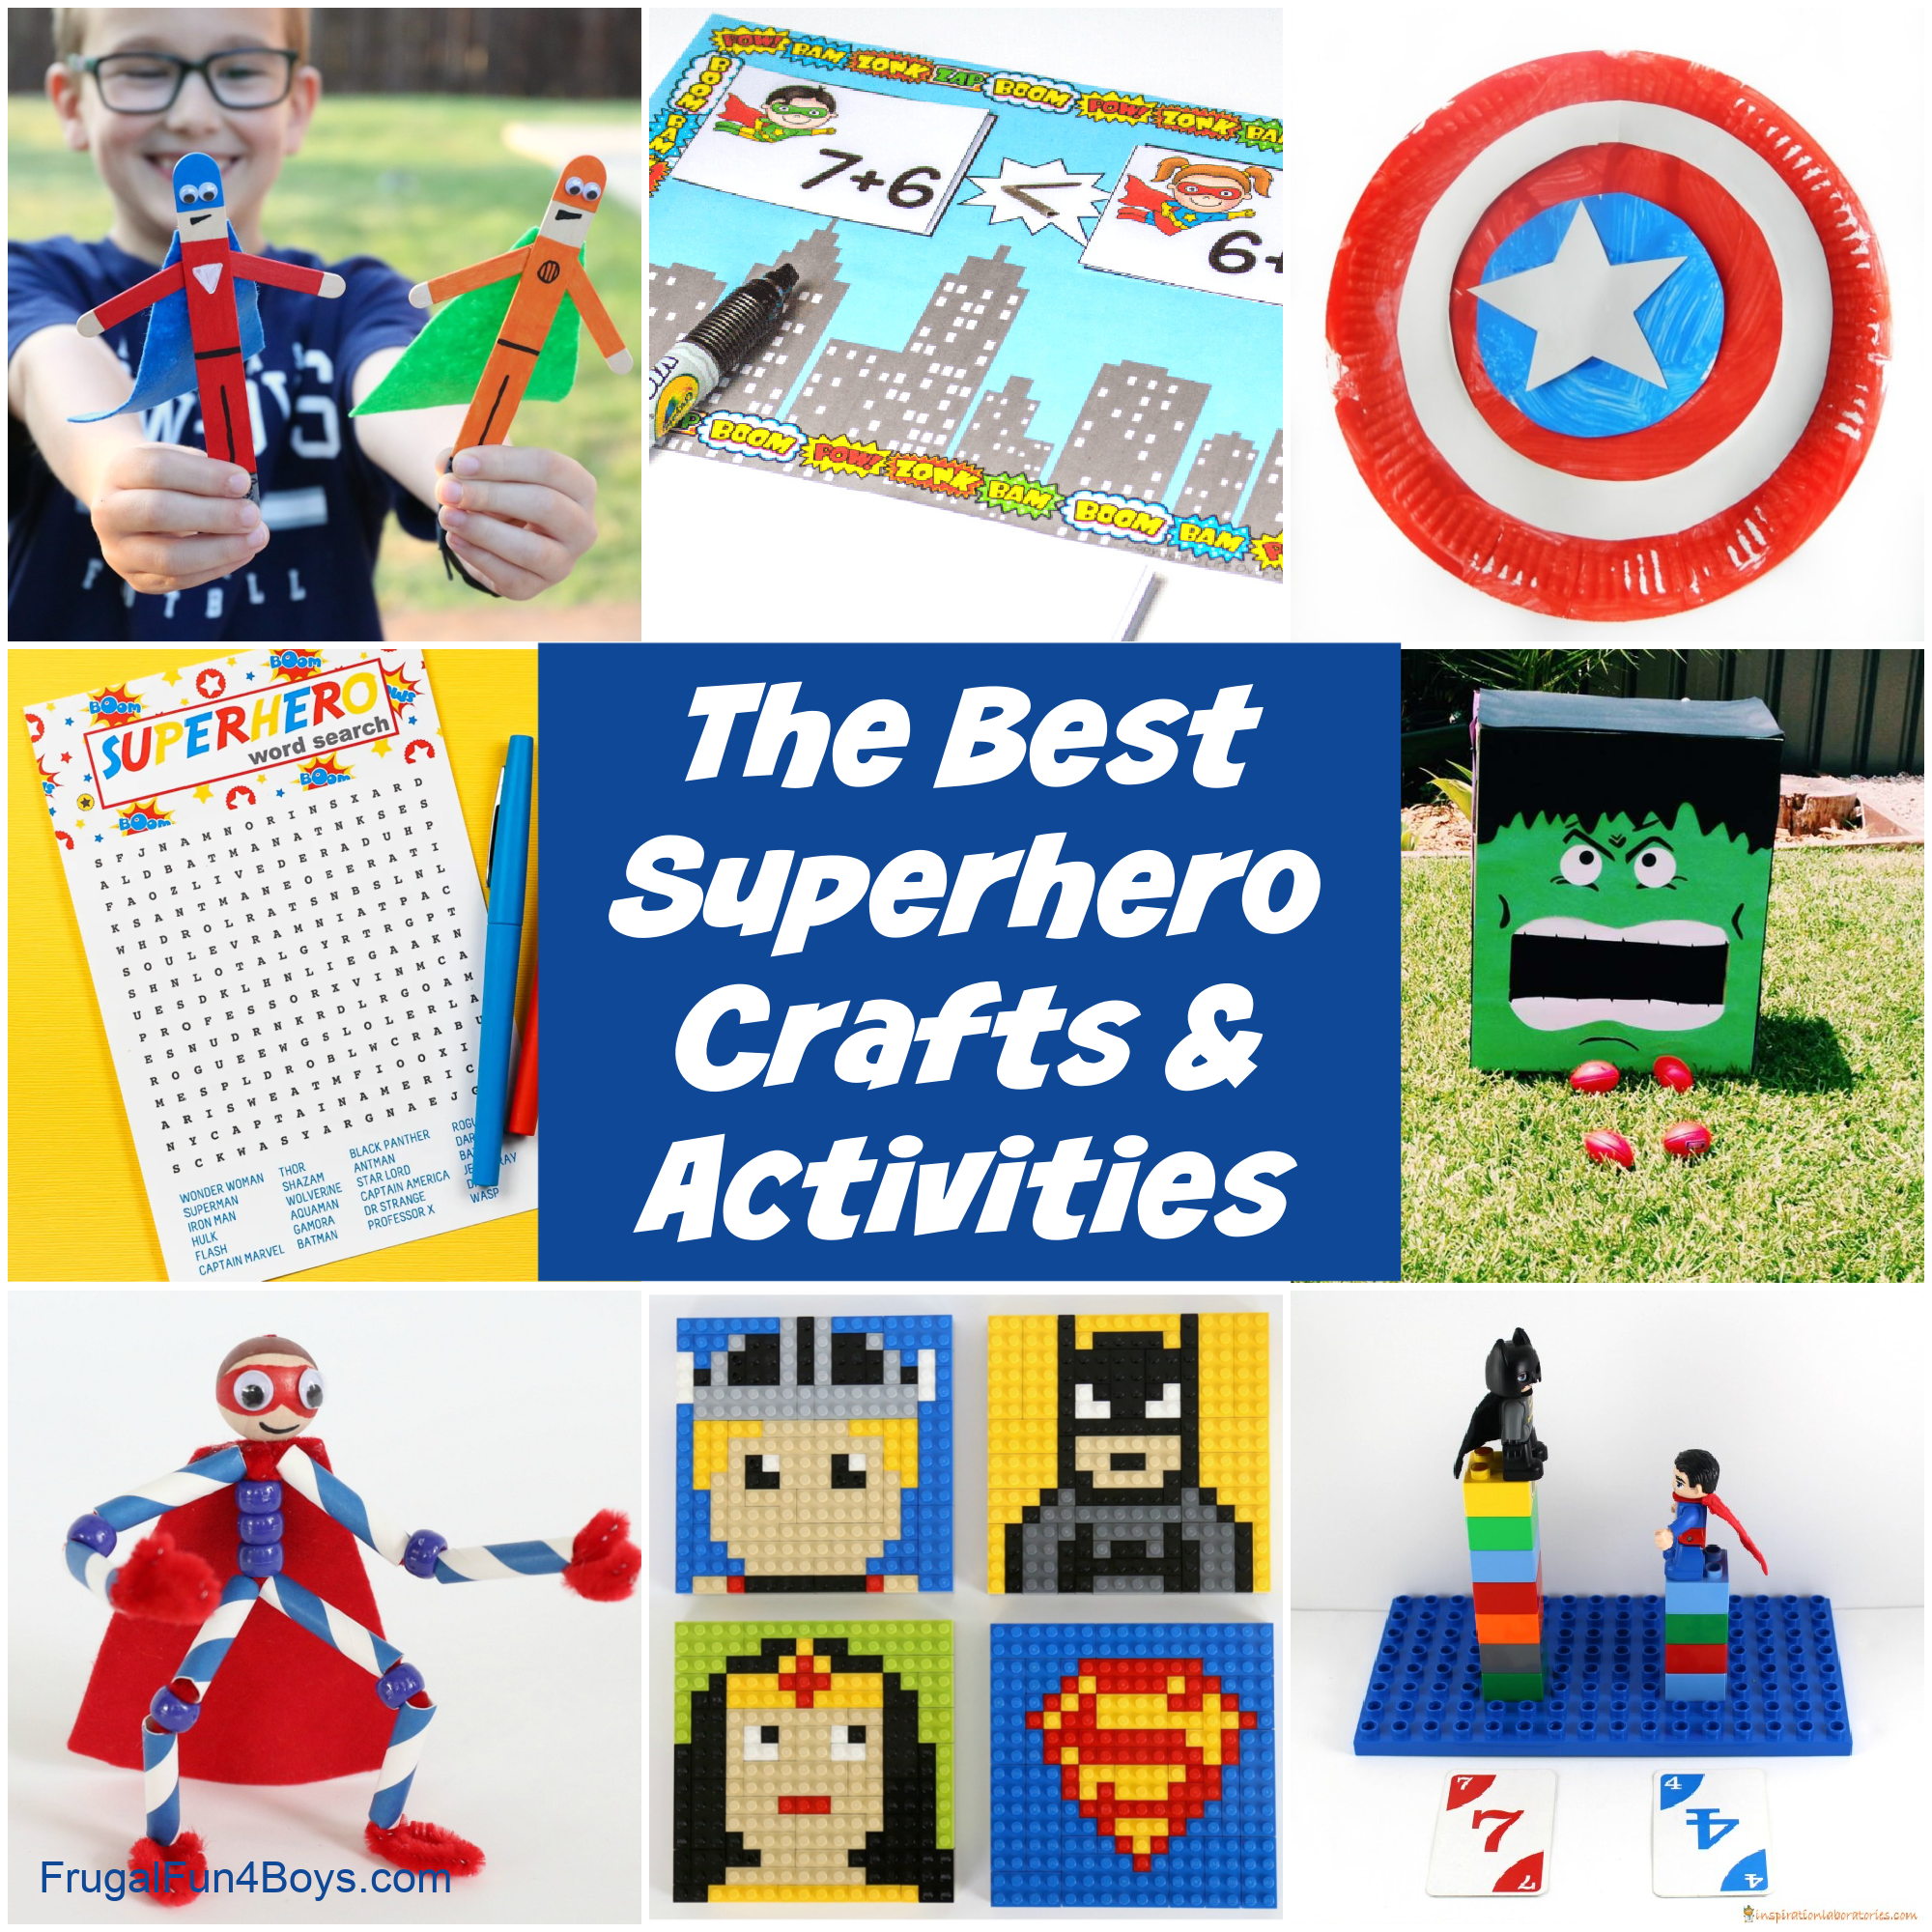 The Best Superhero Crafts and Activities for Kids